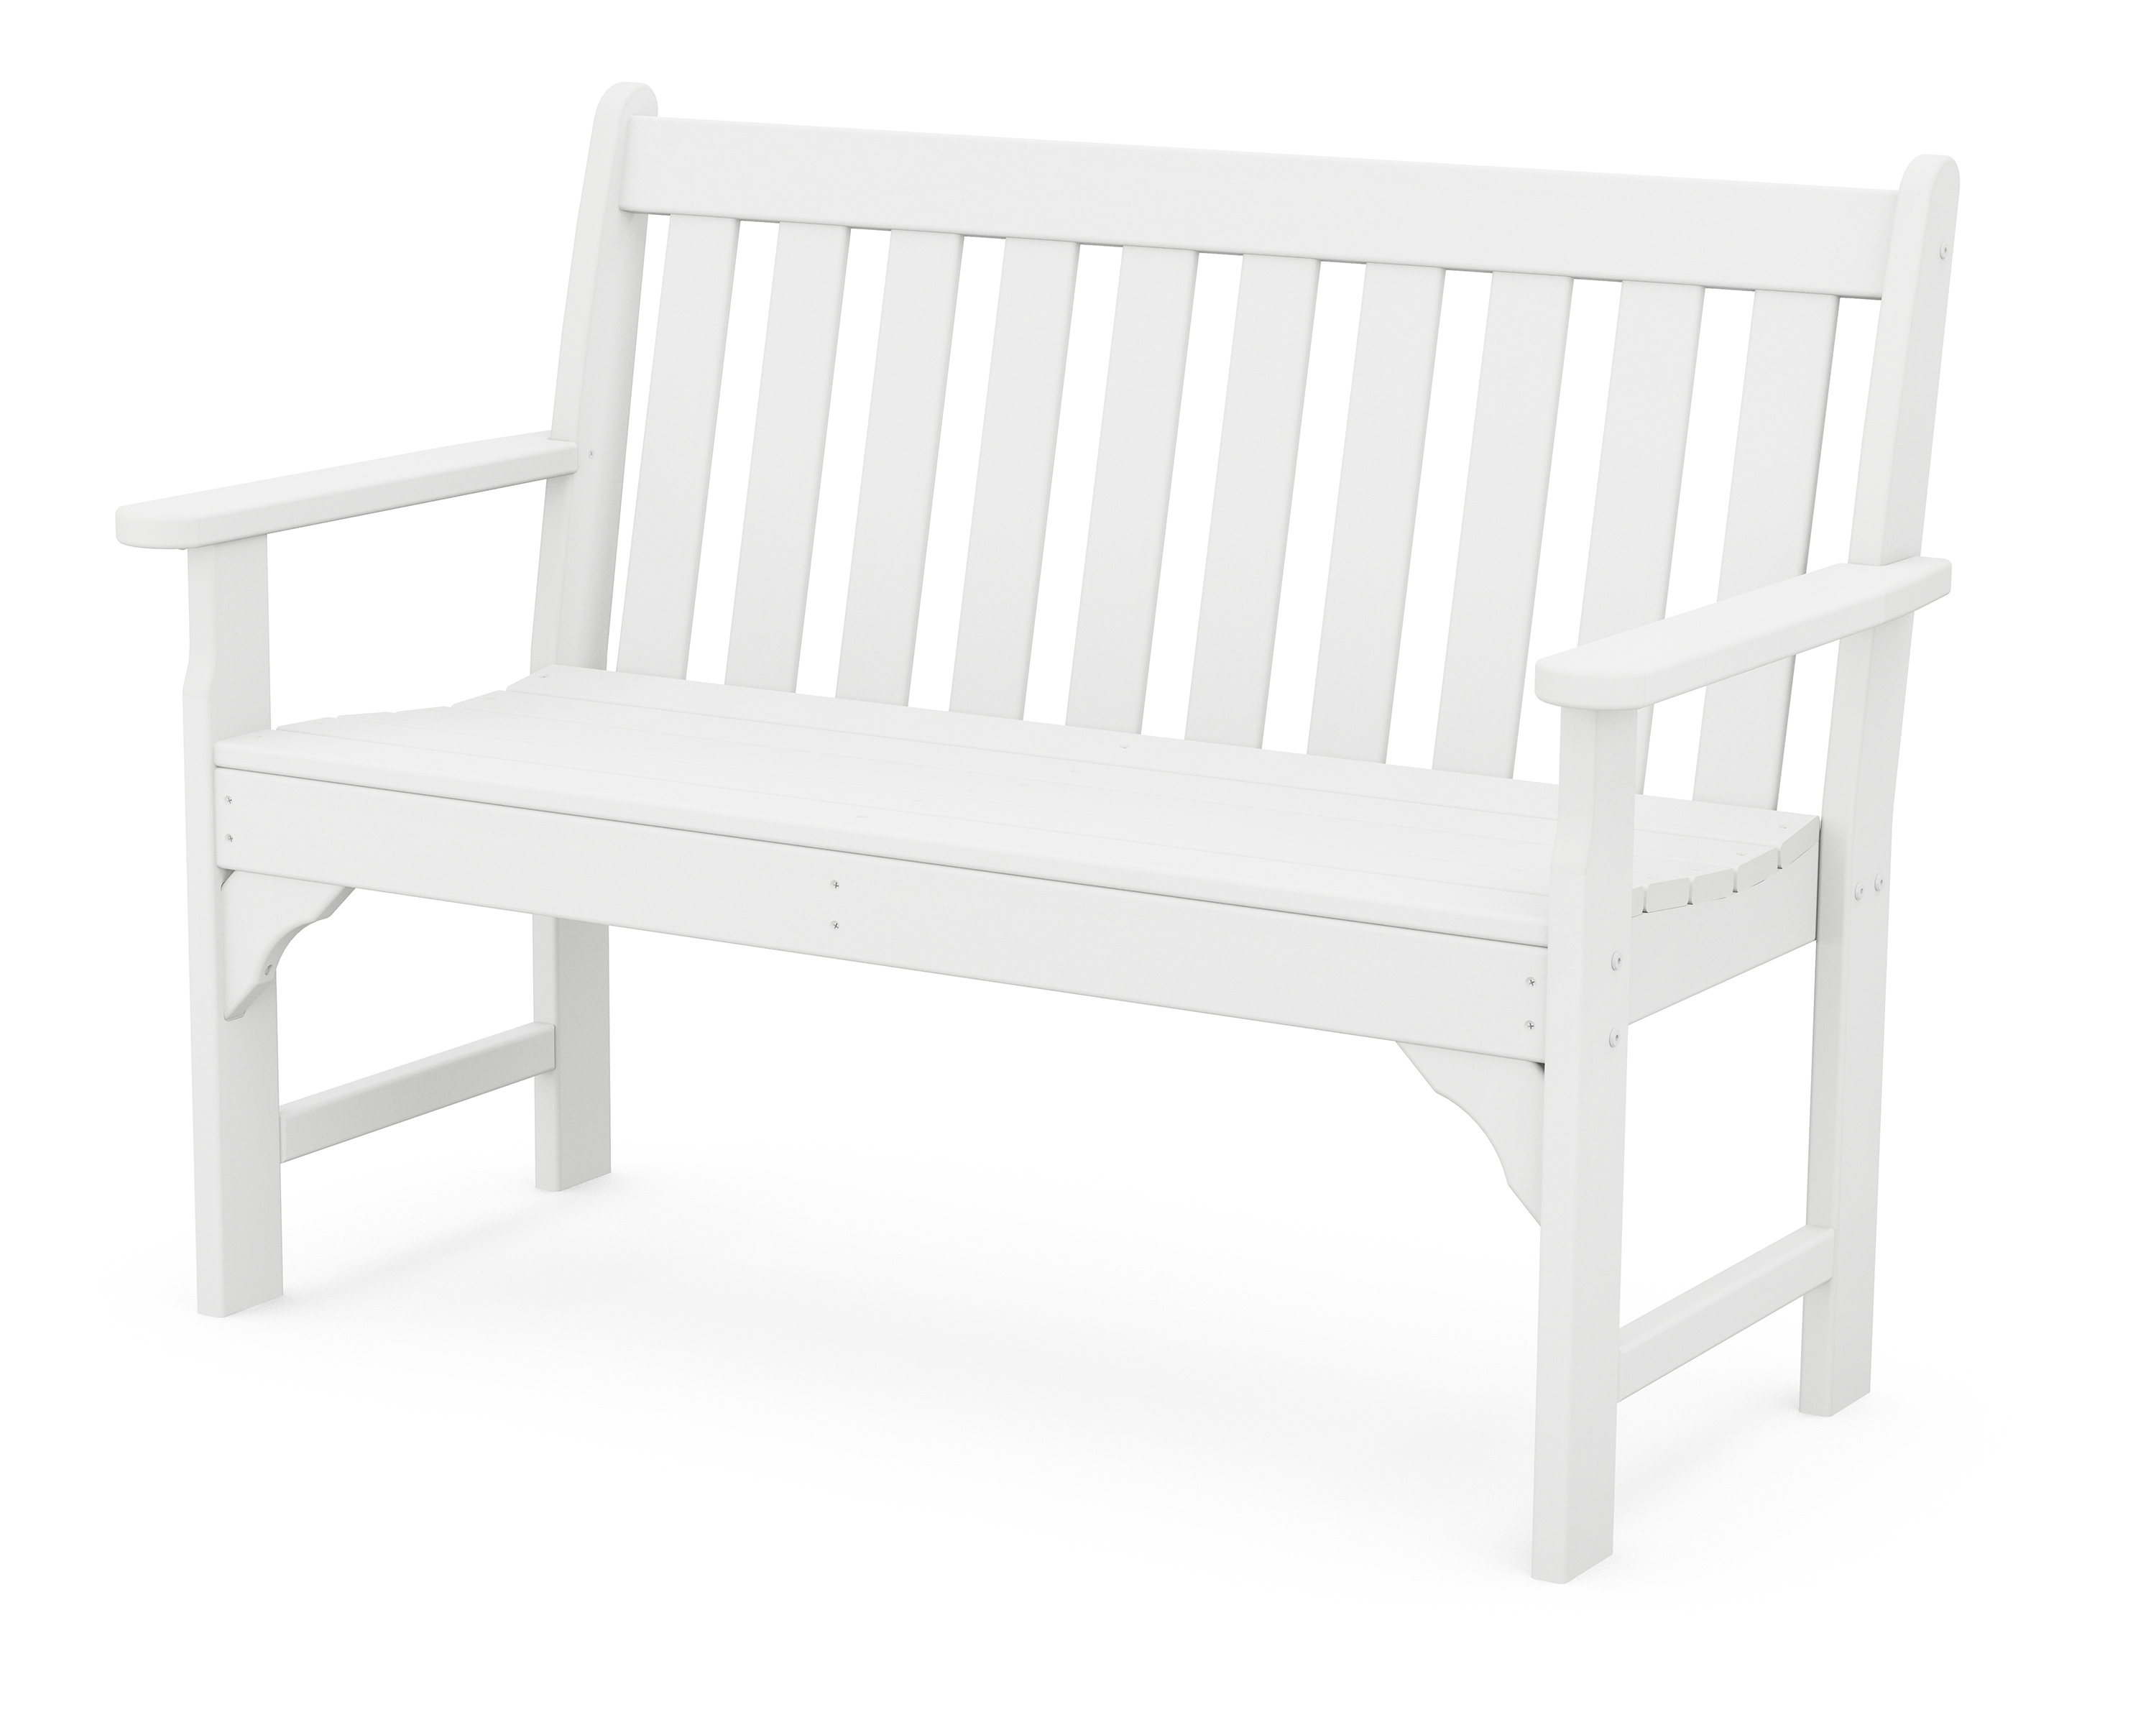 POLYWOOD Vineyard 48" Recycled Plastic Garden Bench - image 1 of 9